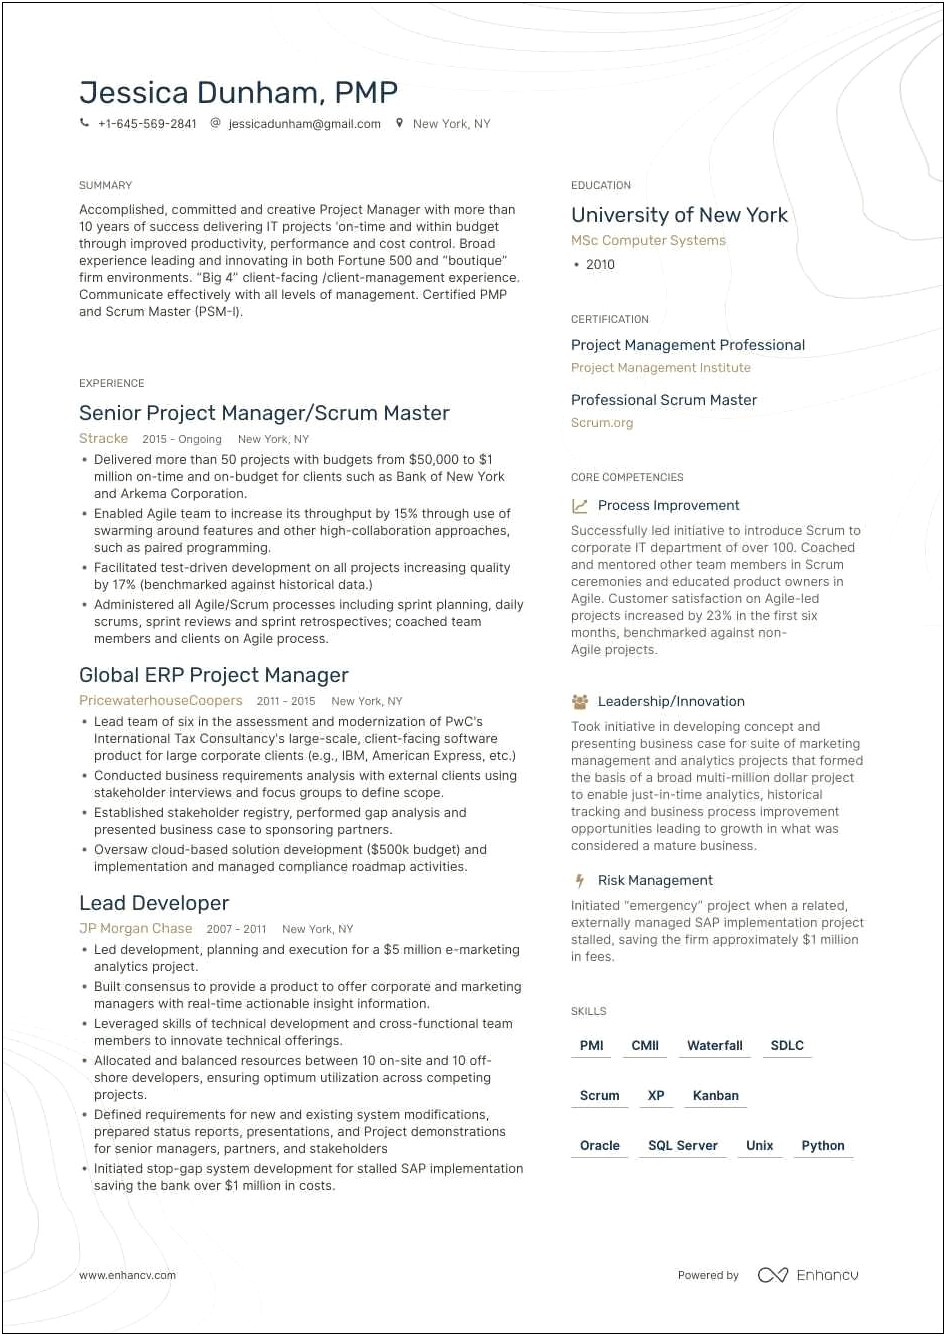 Resume Examples With Masters Degree